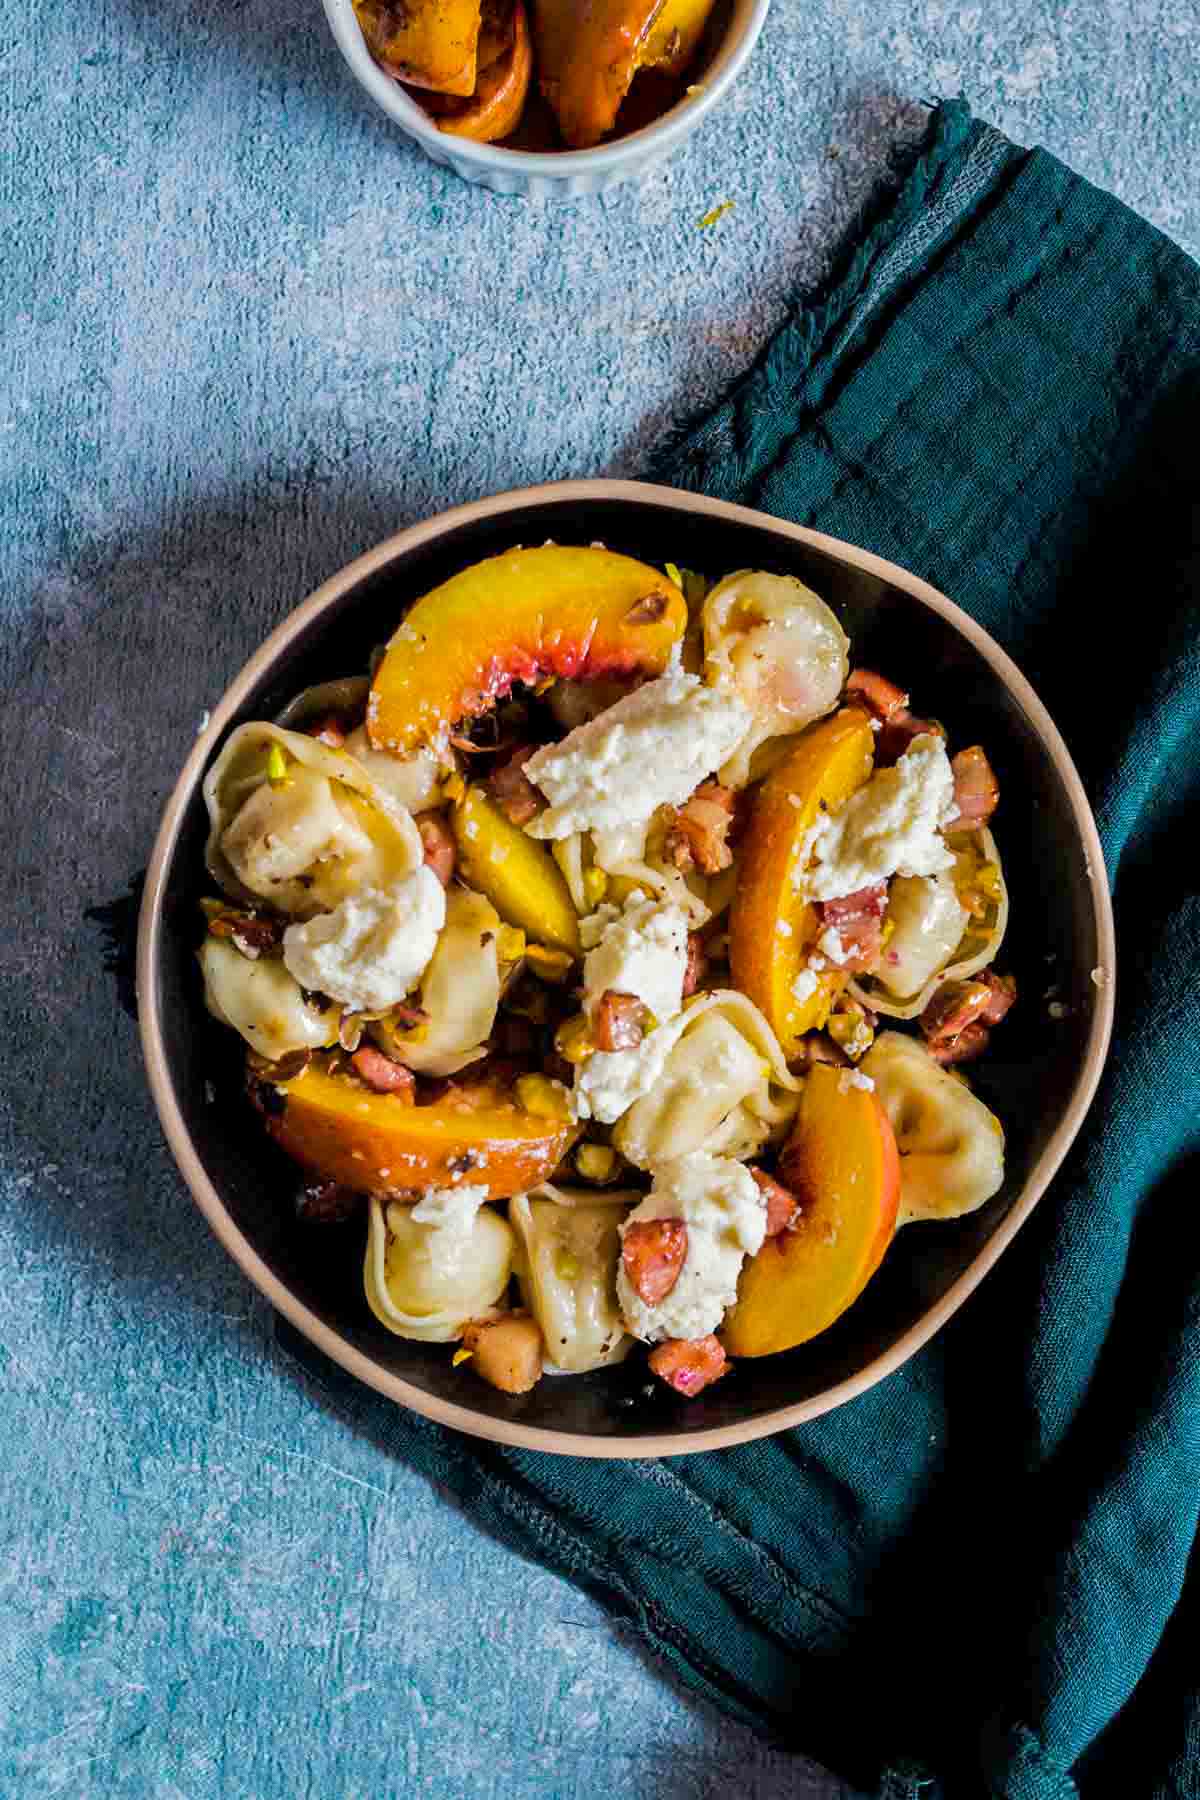 tortellini salad with peaches, pistachios, and ricotta cheese on top